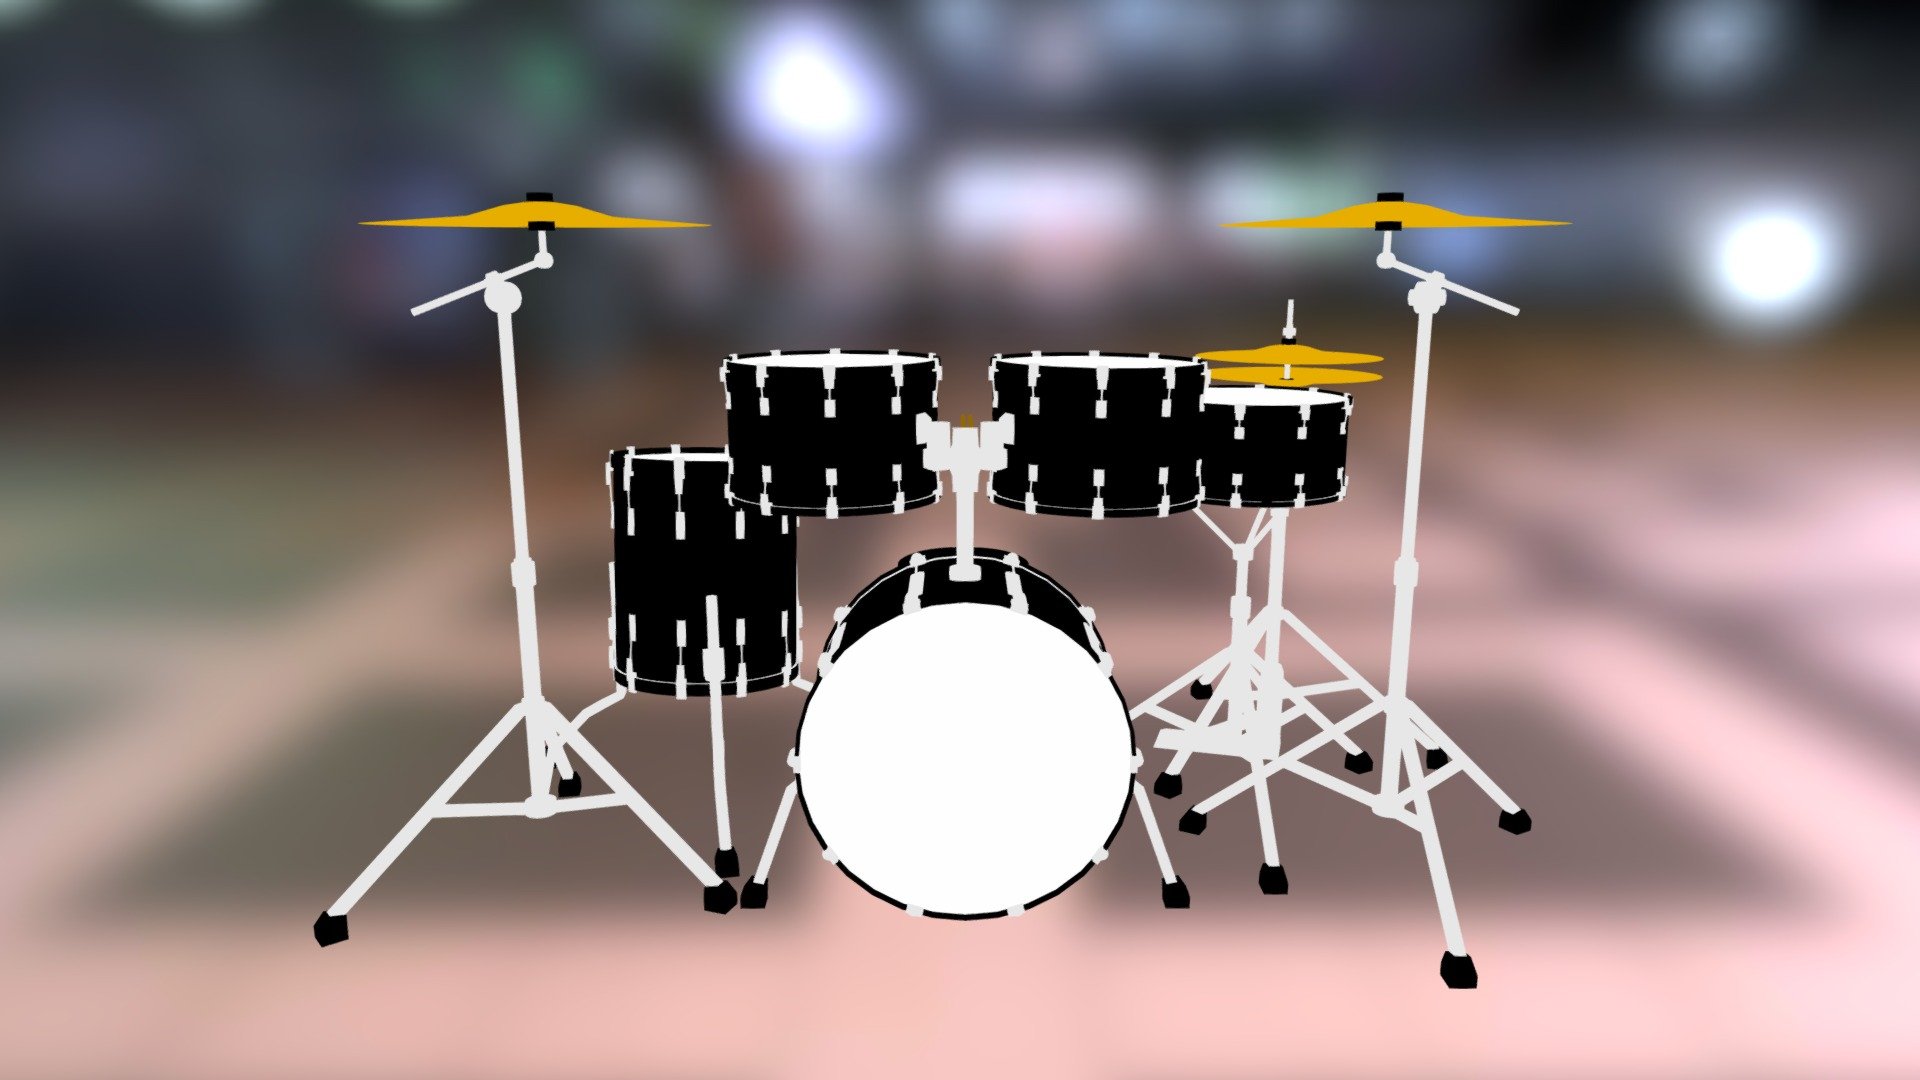 This drum set includes armature of Blender at second layer.
You can adjust height or angle of drums and enjoy some gimmicks of bass drum stick and hi-hat 3d model